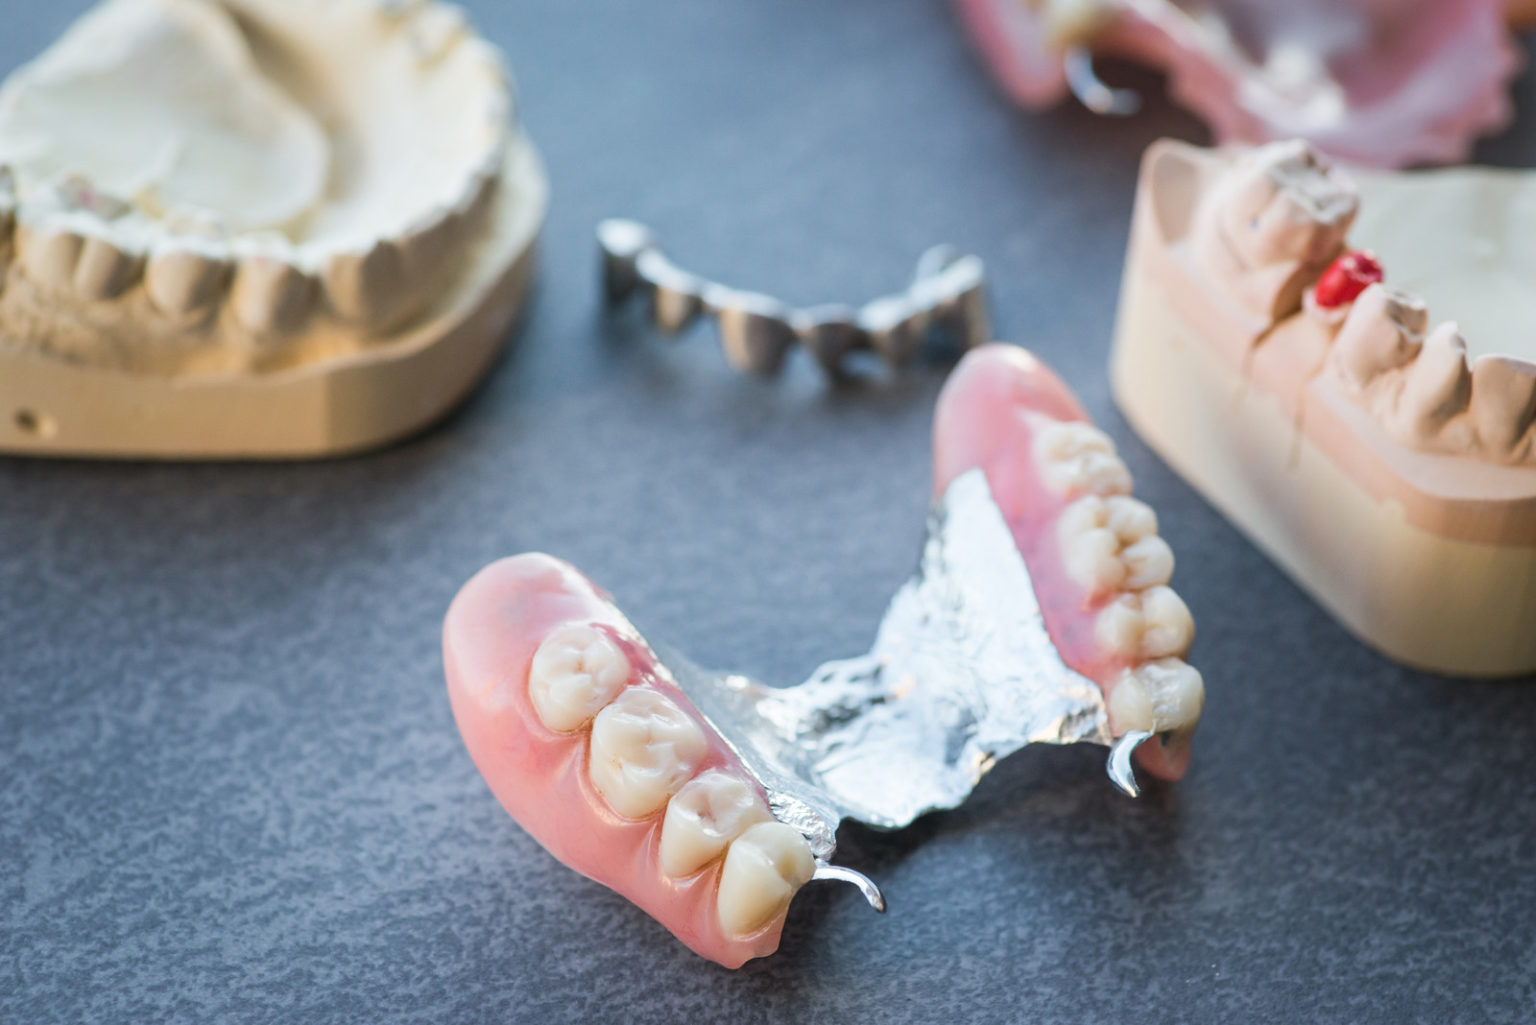 tips for maintaining oral health with dentures